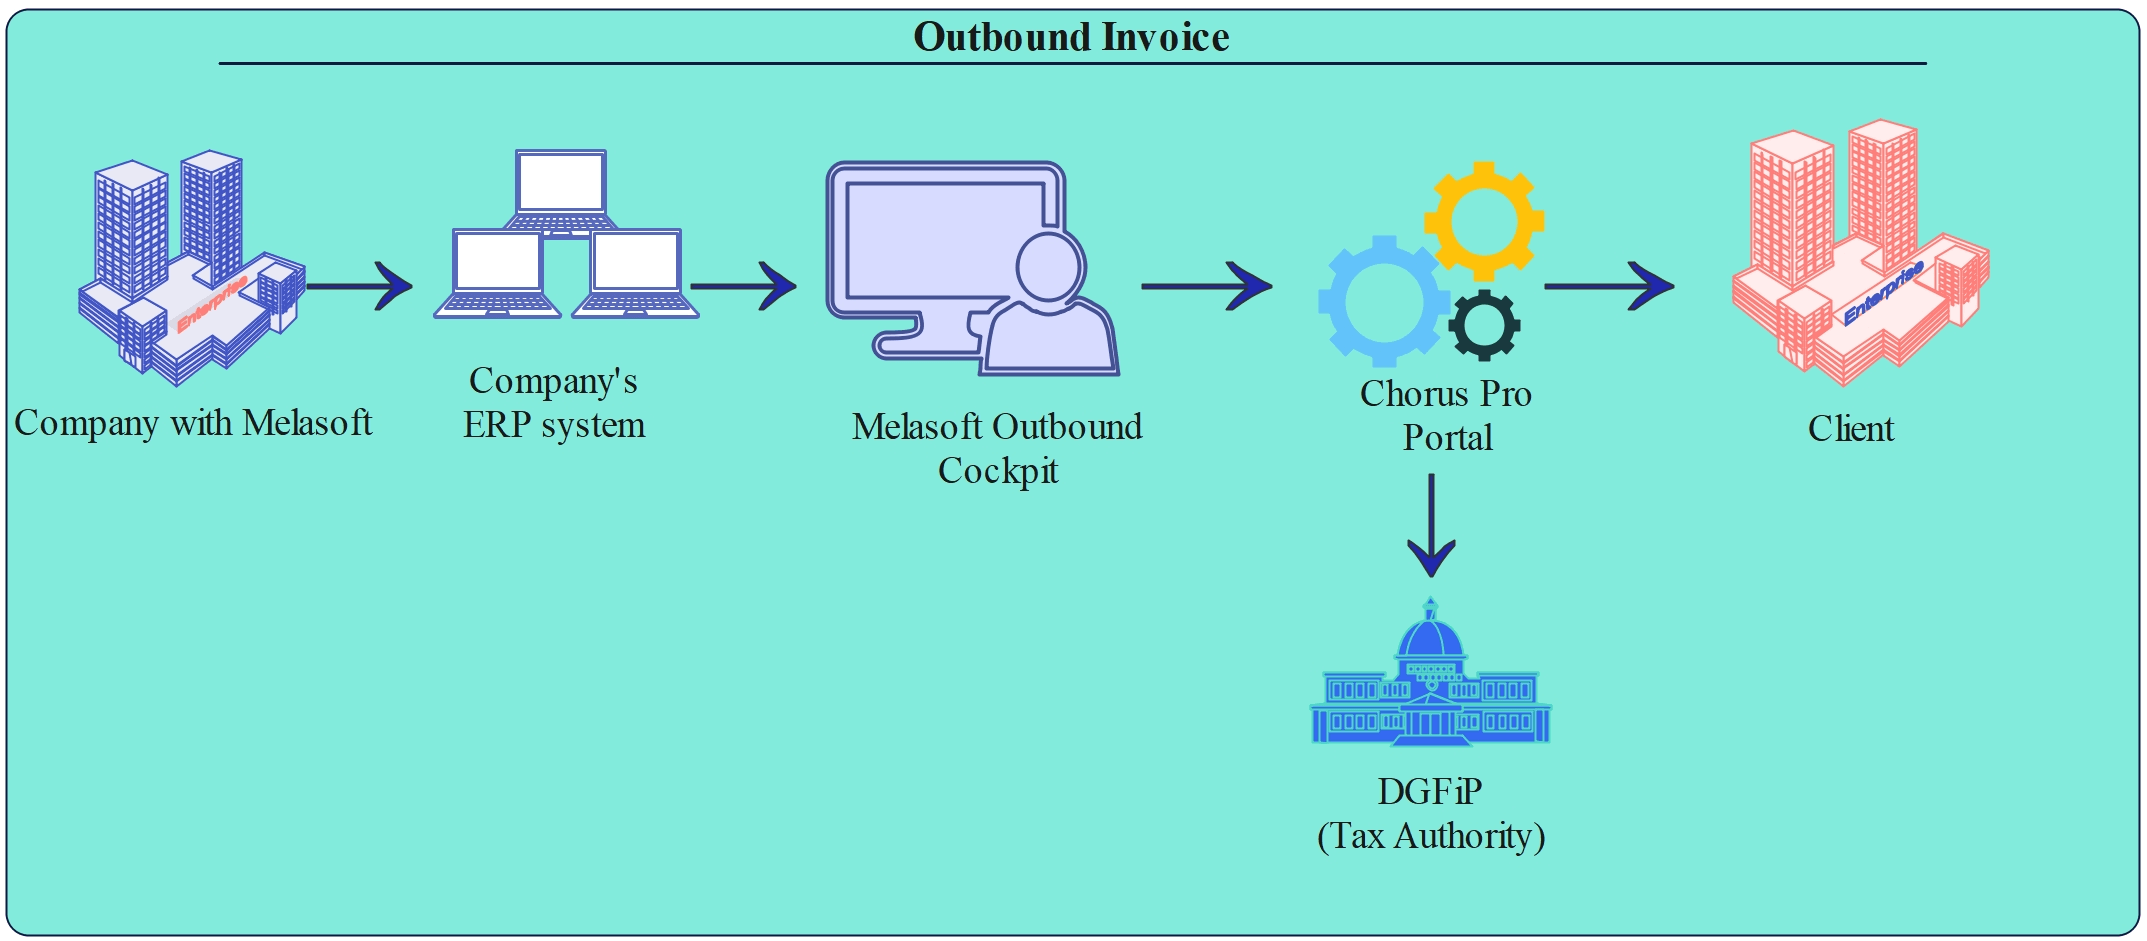 Outbound Invoice